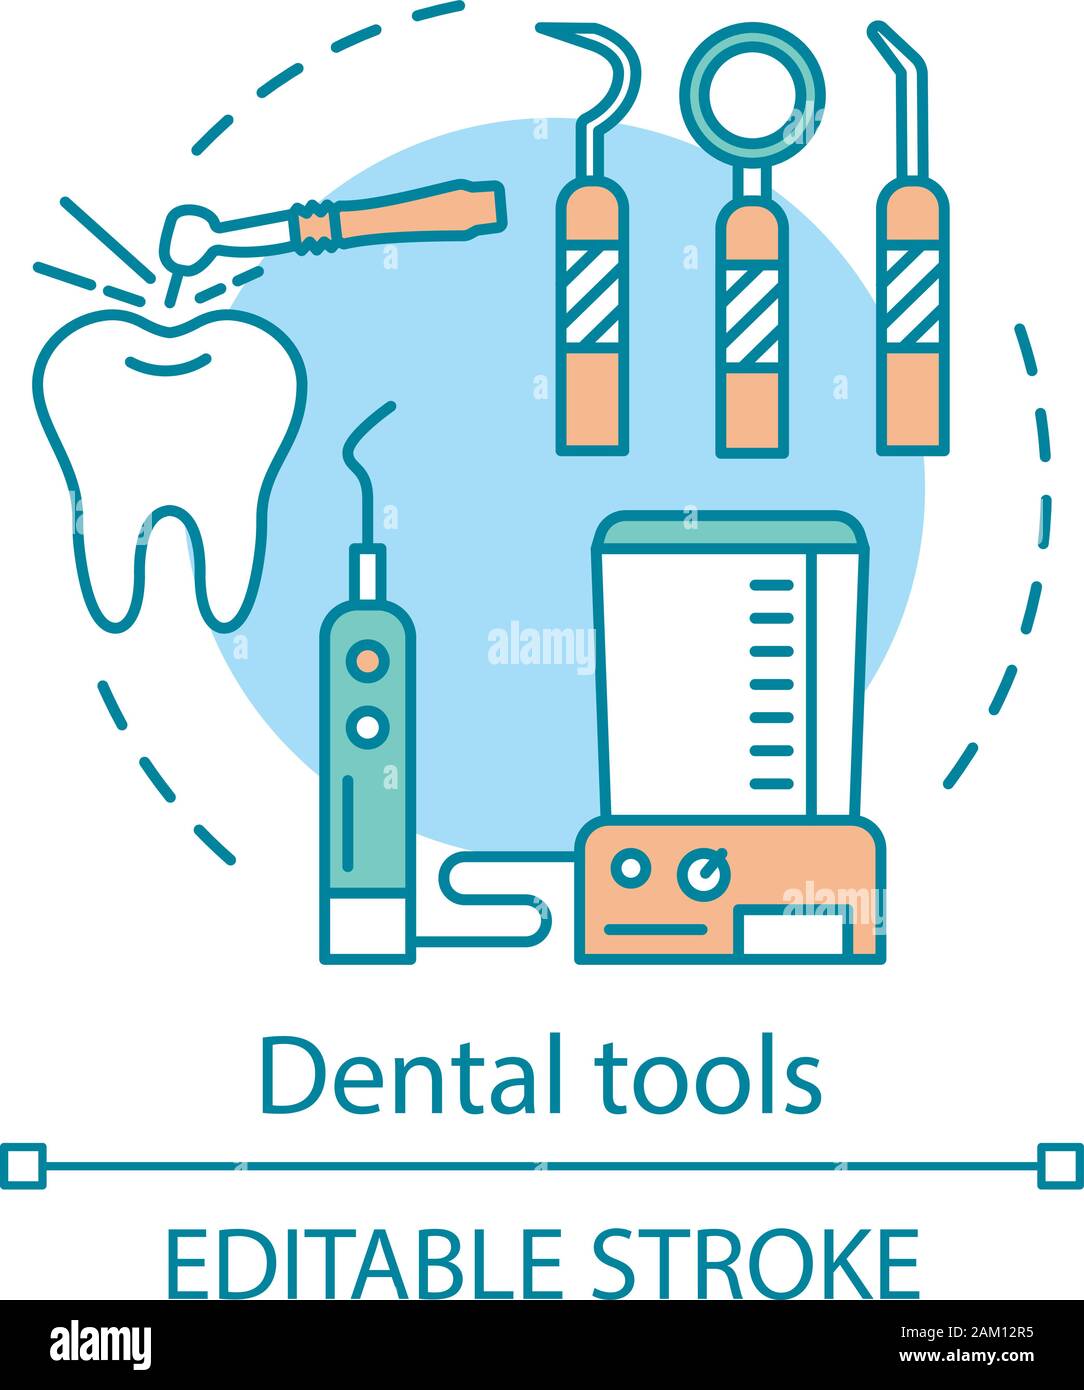 Dental tools vector concept icon. Dentist tools. Devices for teeth